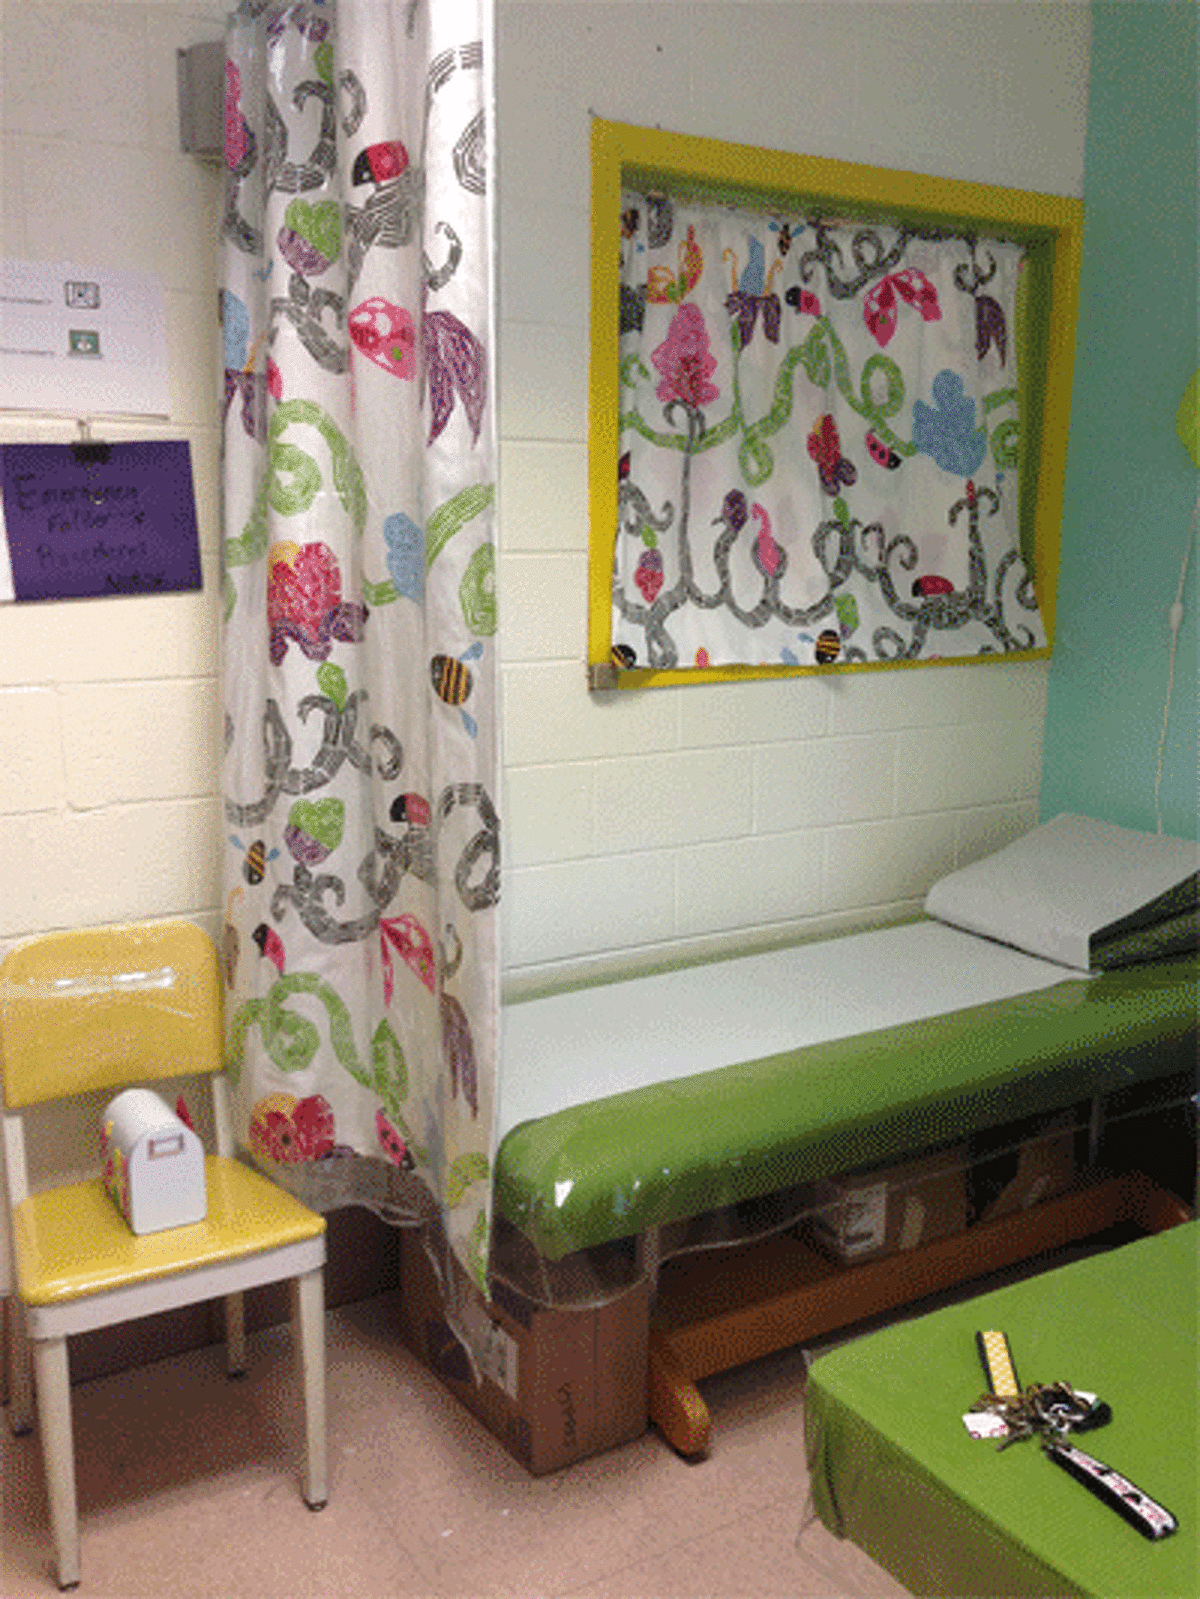 The Mohegan School nurse’s office was given a garden theme by parent and community volunteers.